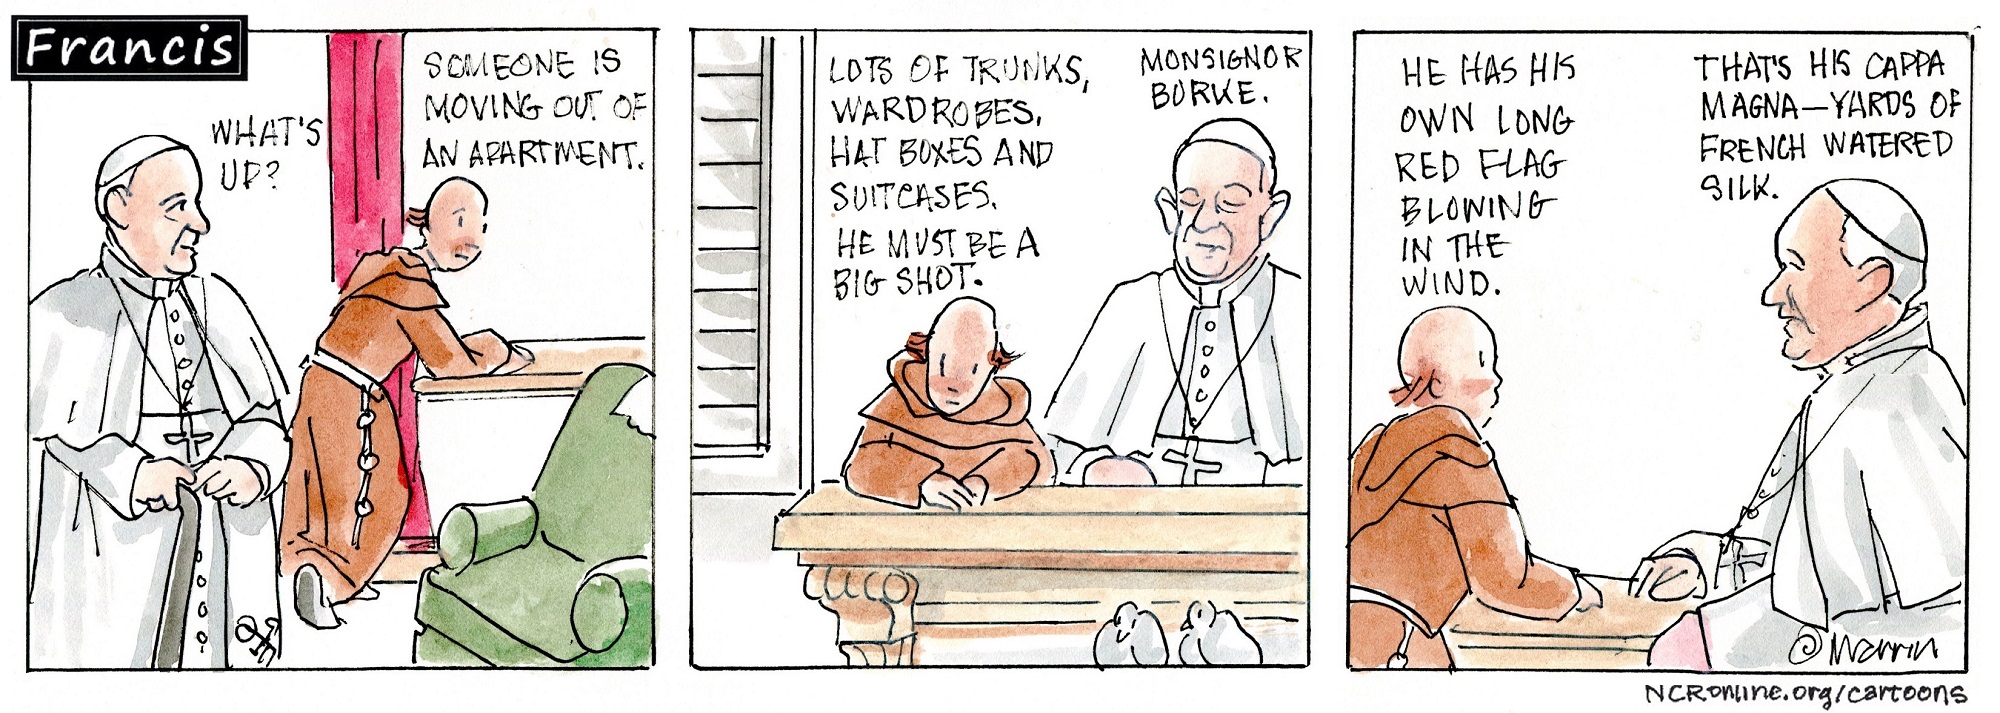 Francis, the comic strip: It looks like someone is moving out.